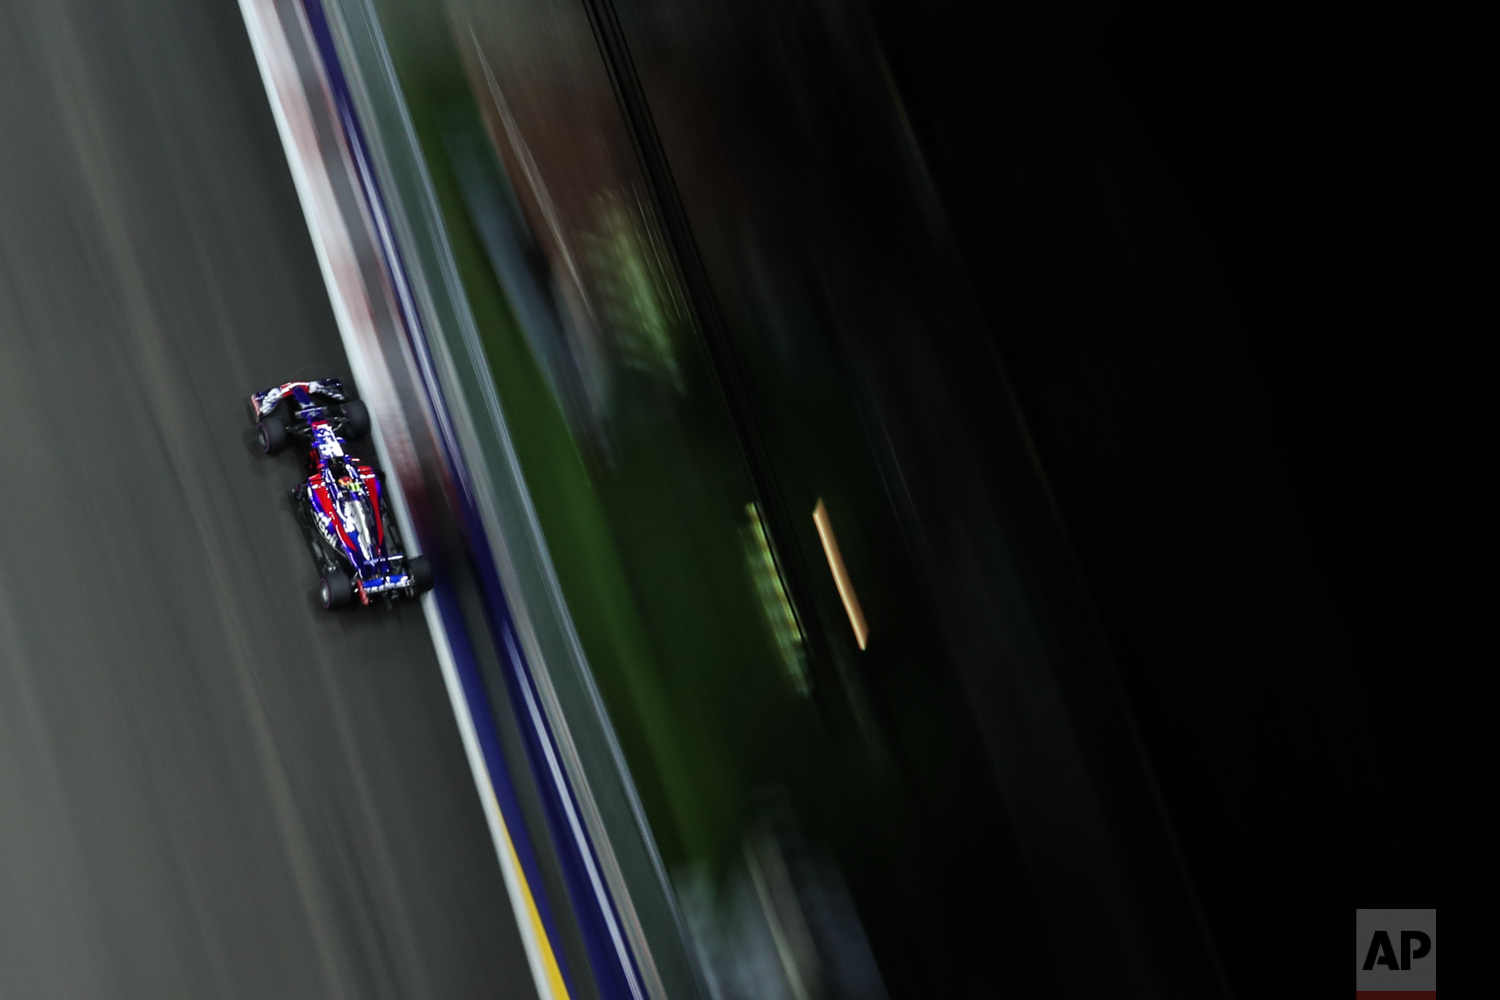  Toro Rosso driver Carlos Sainz Jr.of Spain steers his car during the second practice session at the Singapore Formula One Grand Prix on the Marina Bay City Circuit Singapore, Friday, Sept. 15, 2017. (AP Photo/Yong Teck Lim) 